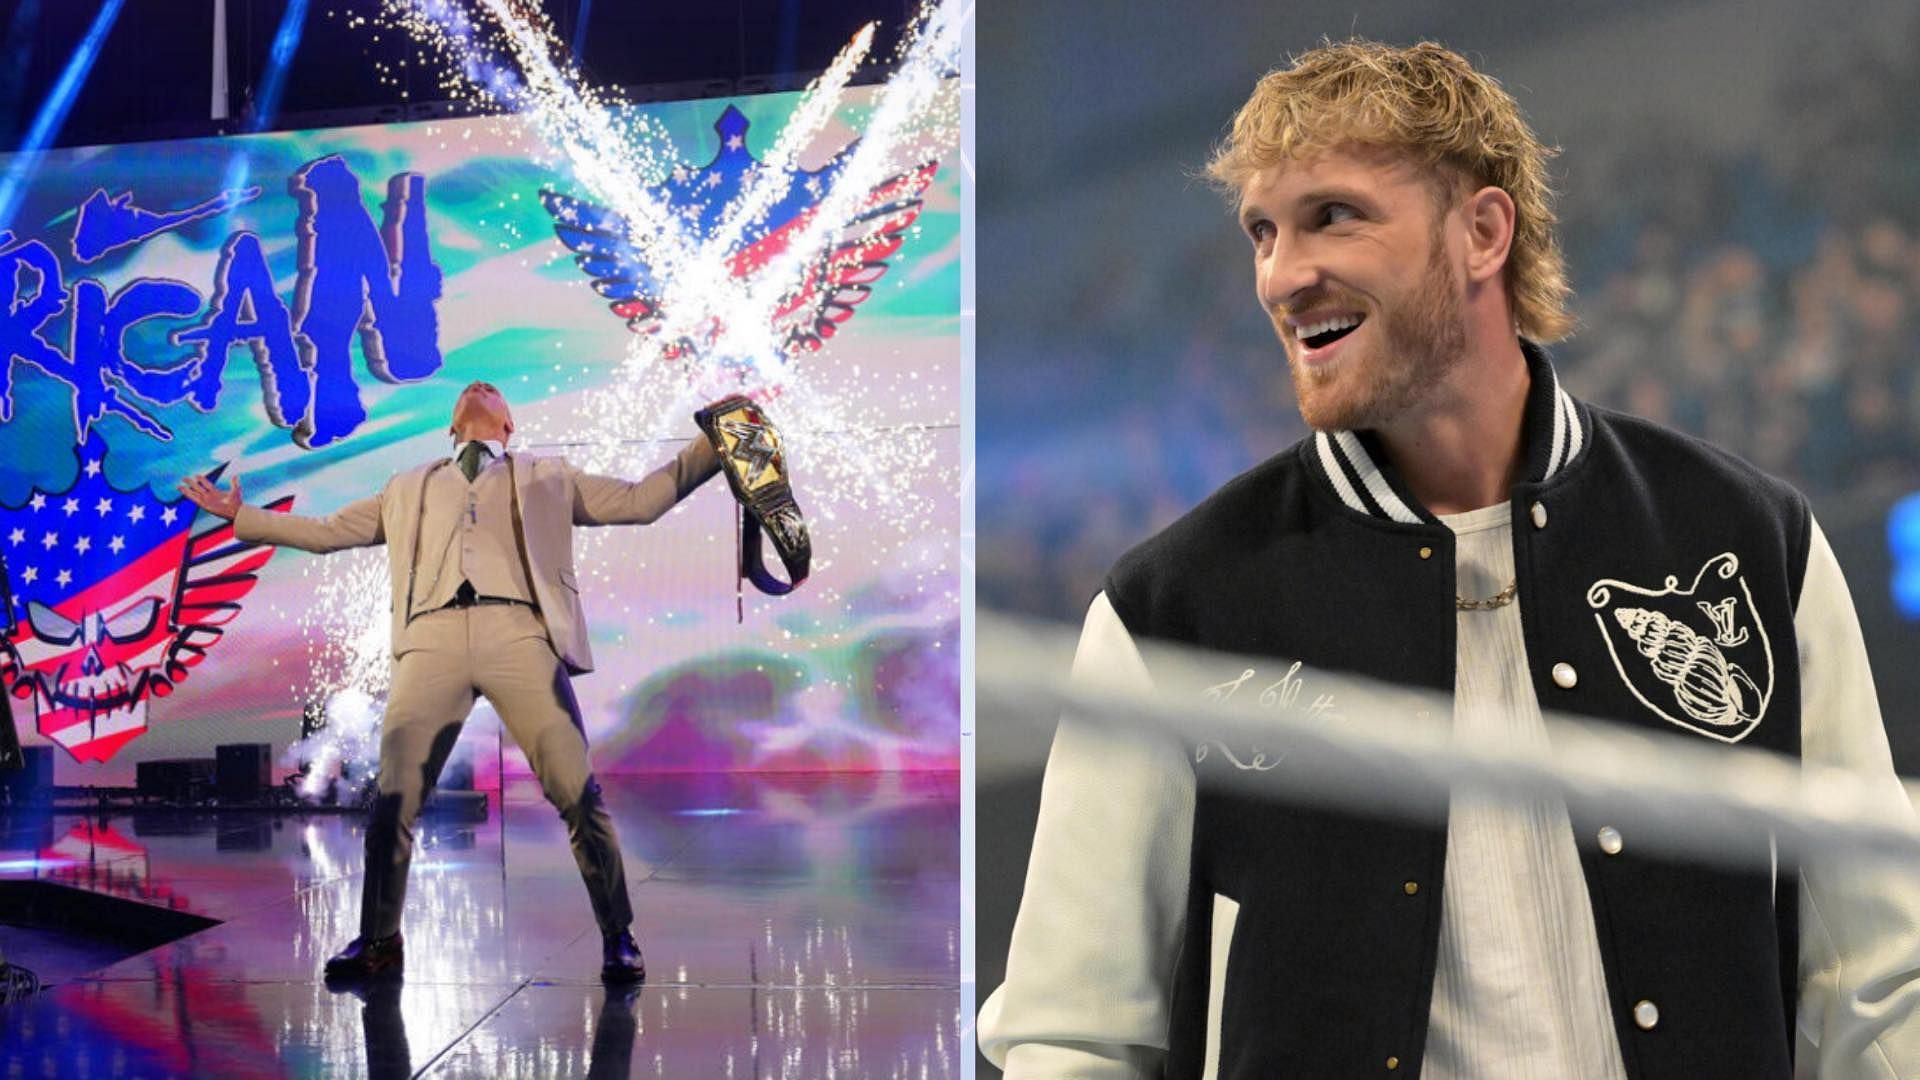 Cody Rhodes and Logan Paul have a big segment on WWE SmackDown next week